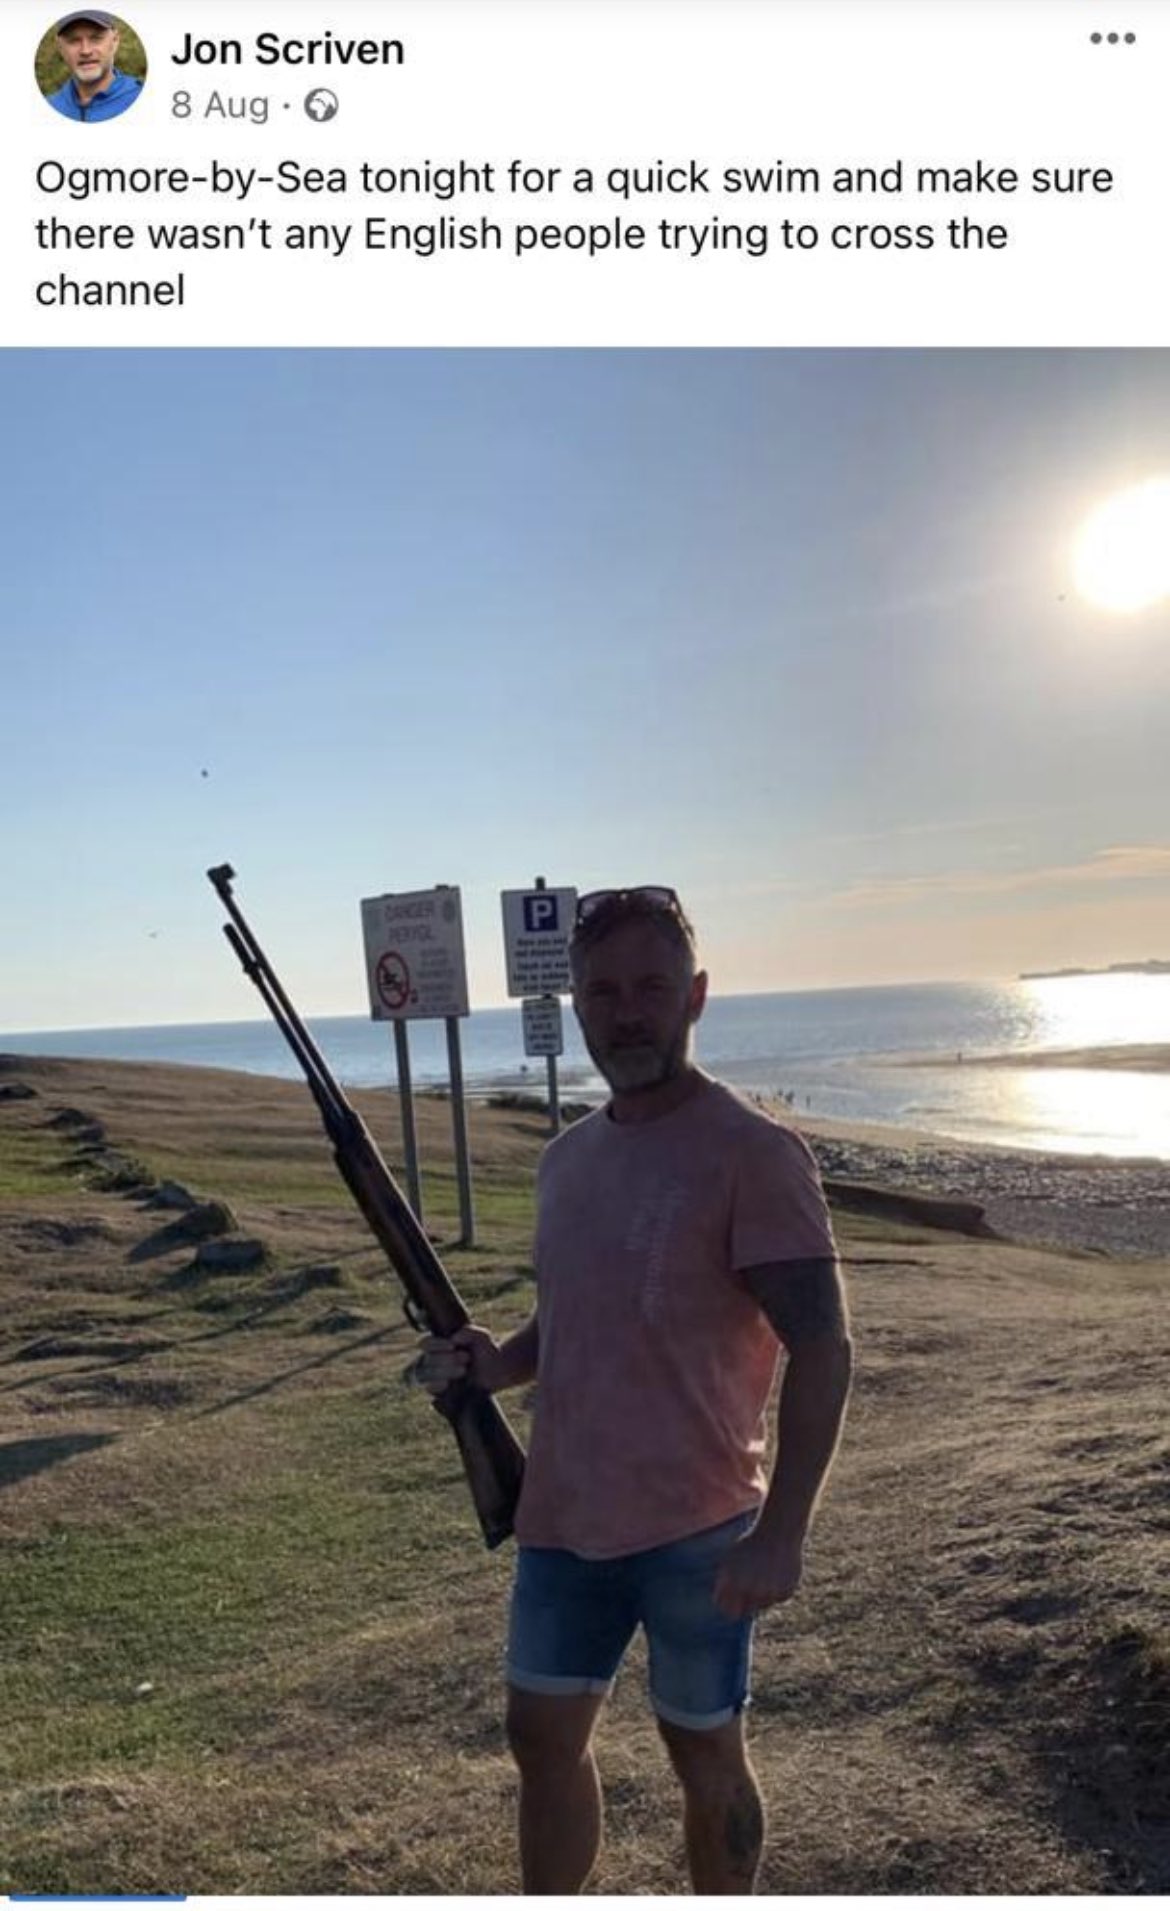 Councillor Jon Scriven appearing to hold a firearm in what has been claimed to be a 'xenophobic' Facebook post. (Jon Scriven)